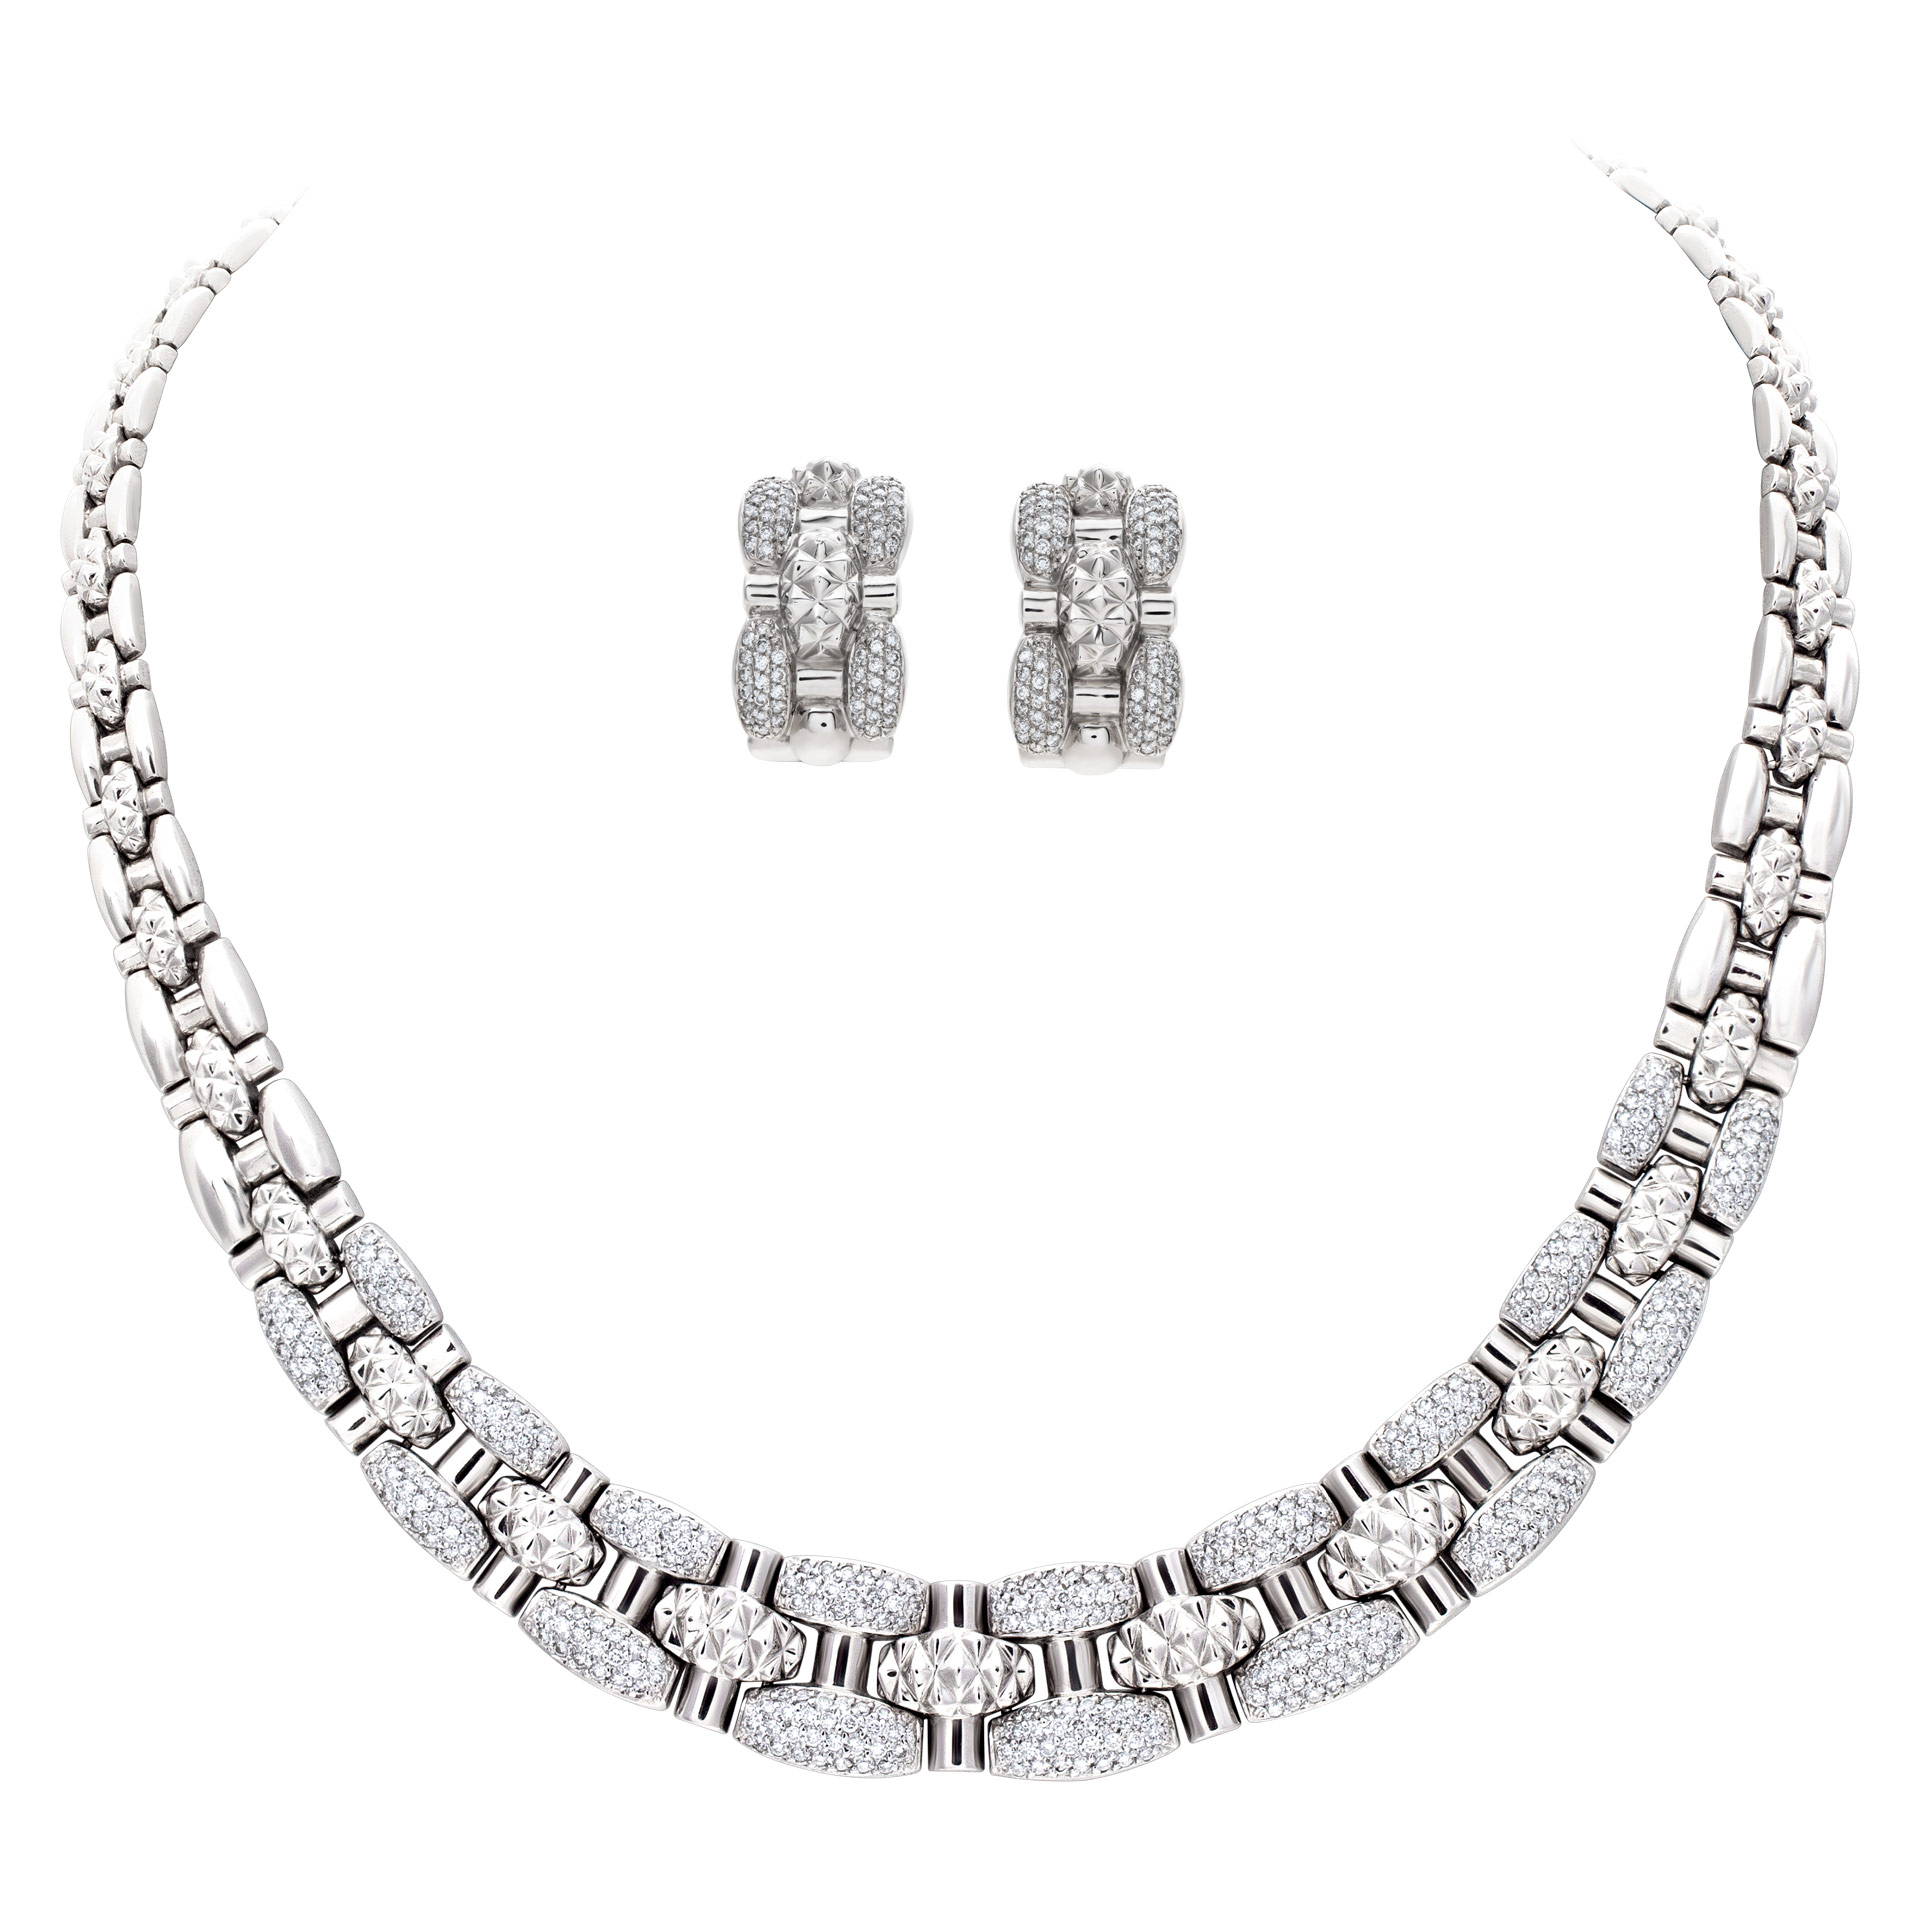 Pave diamond link necklace & earring set in 14k white gold. 3.50 carats image 1